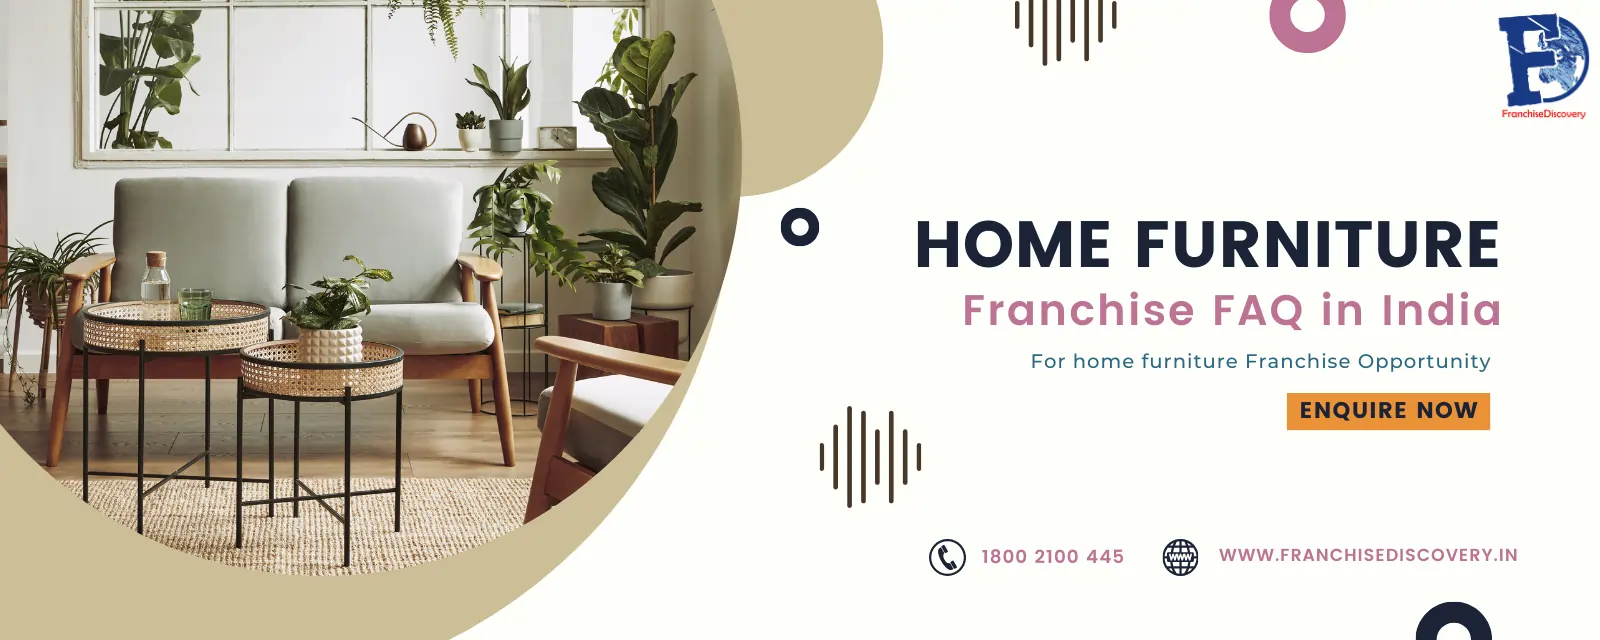 Home Furniture Franchise FAQ in India - Franchise Discovery